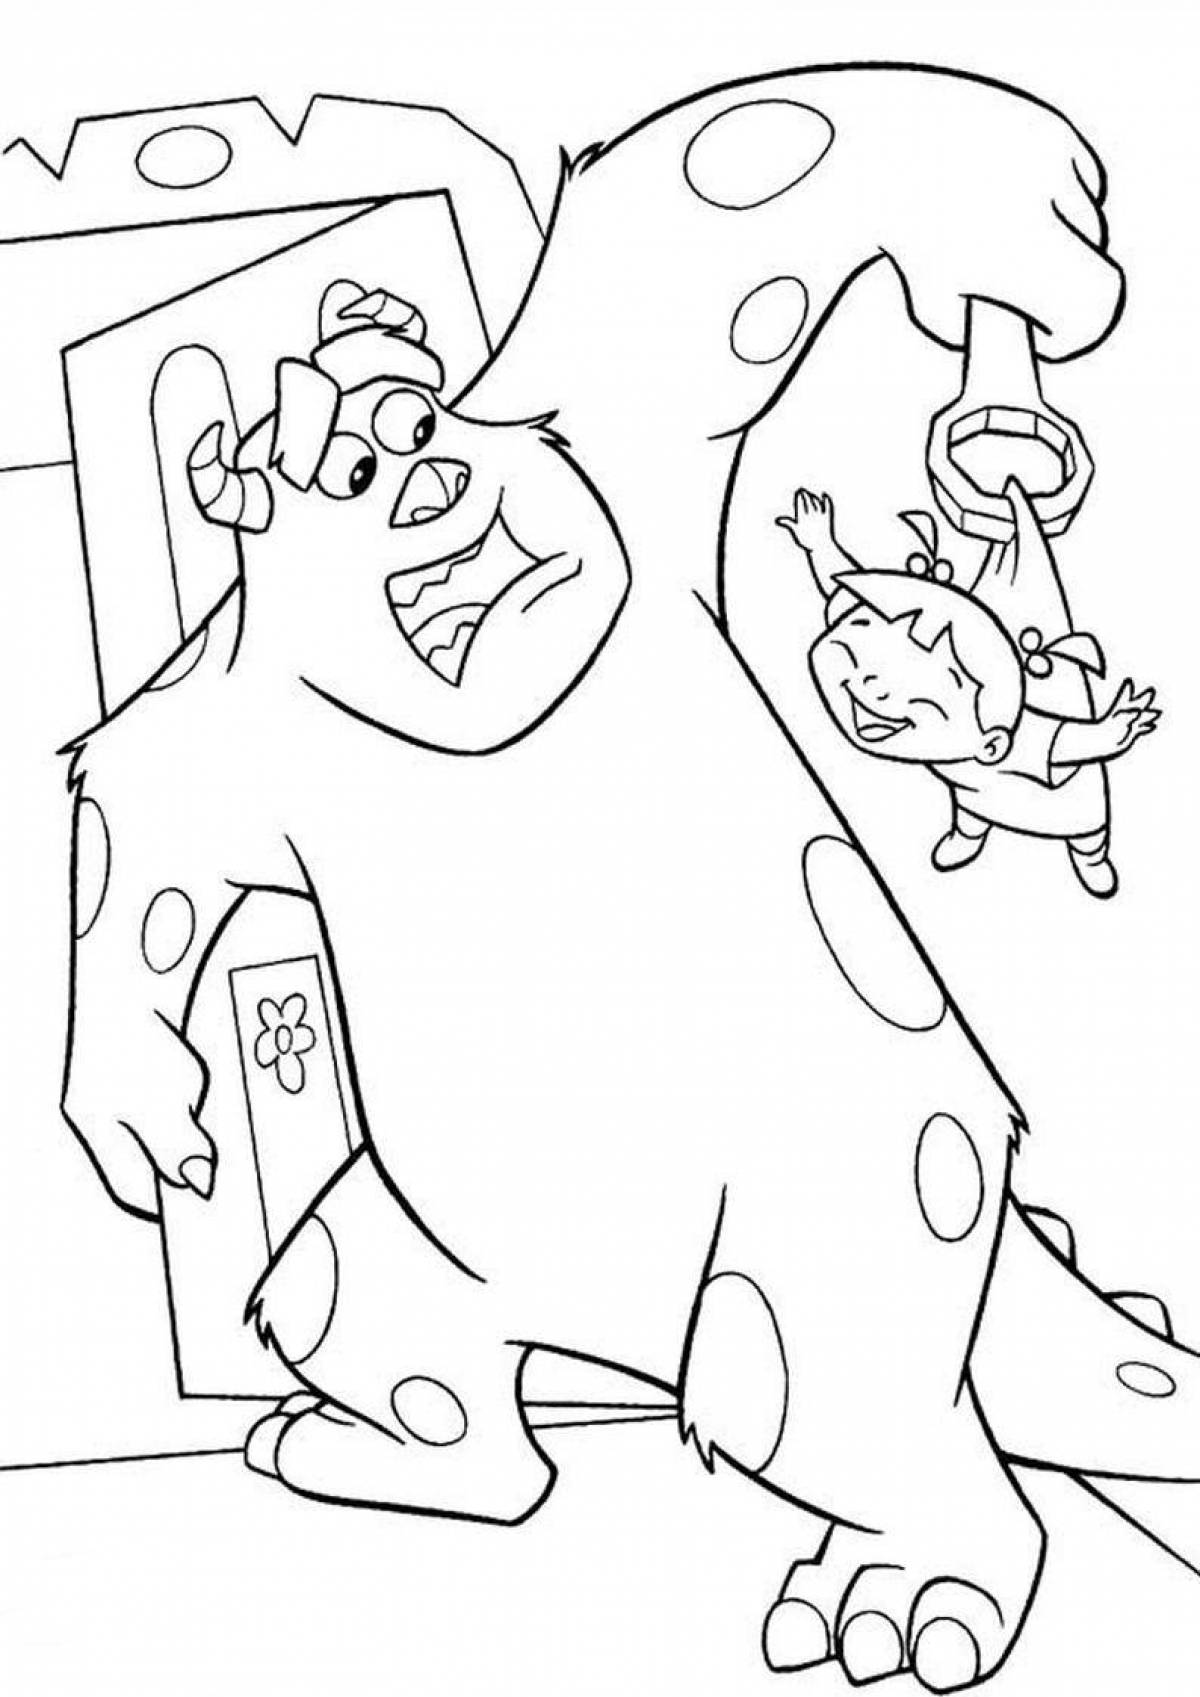 Coloring pages sally and boo obsessed with flowers